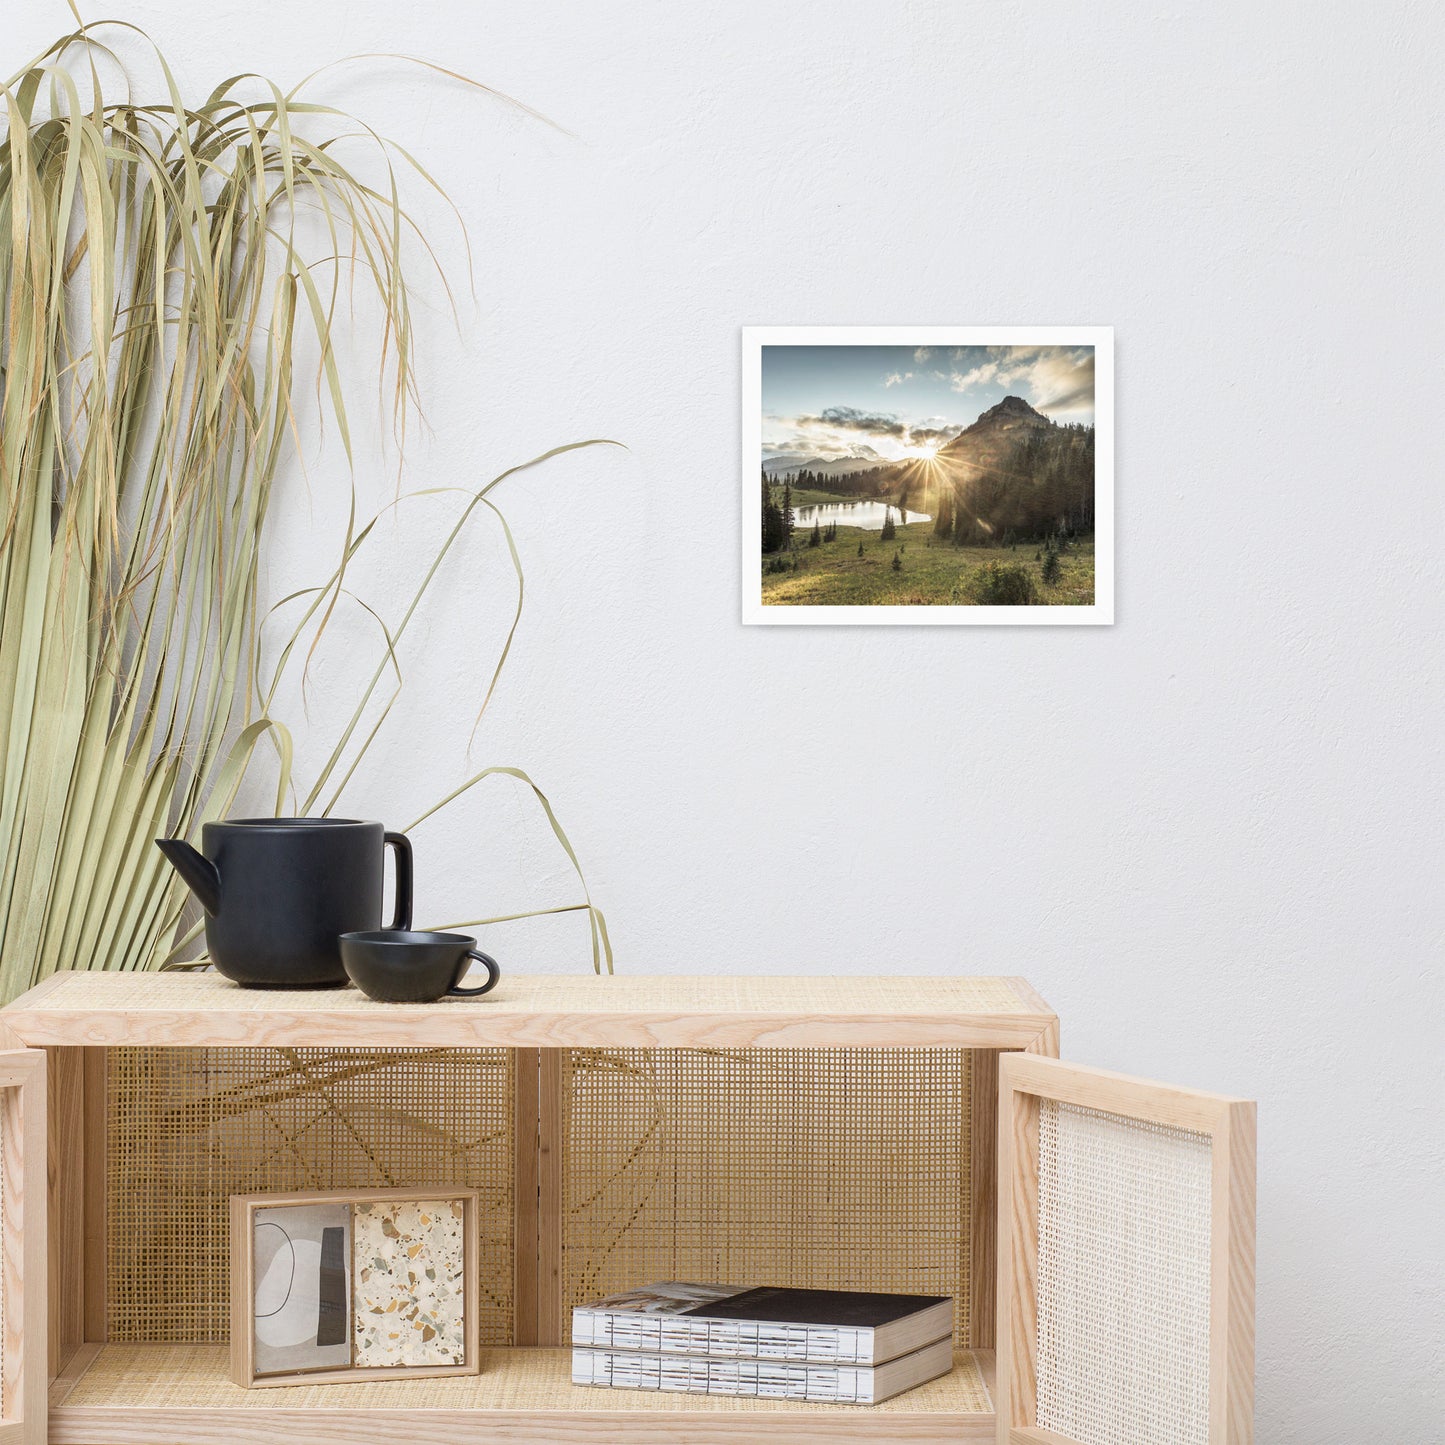 At Peace Rustic Landscape Photograph Framed Wall Art Print